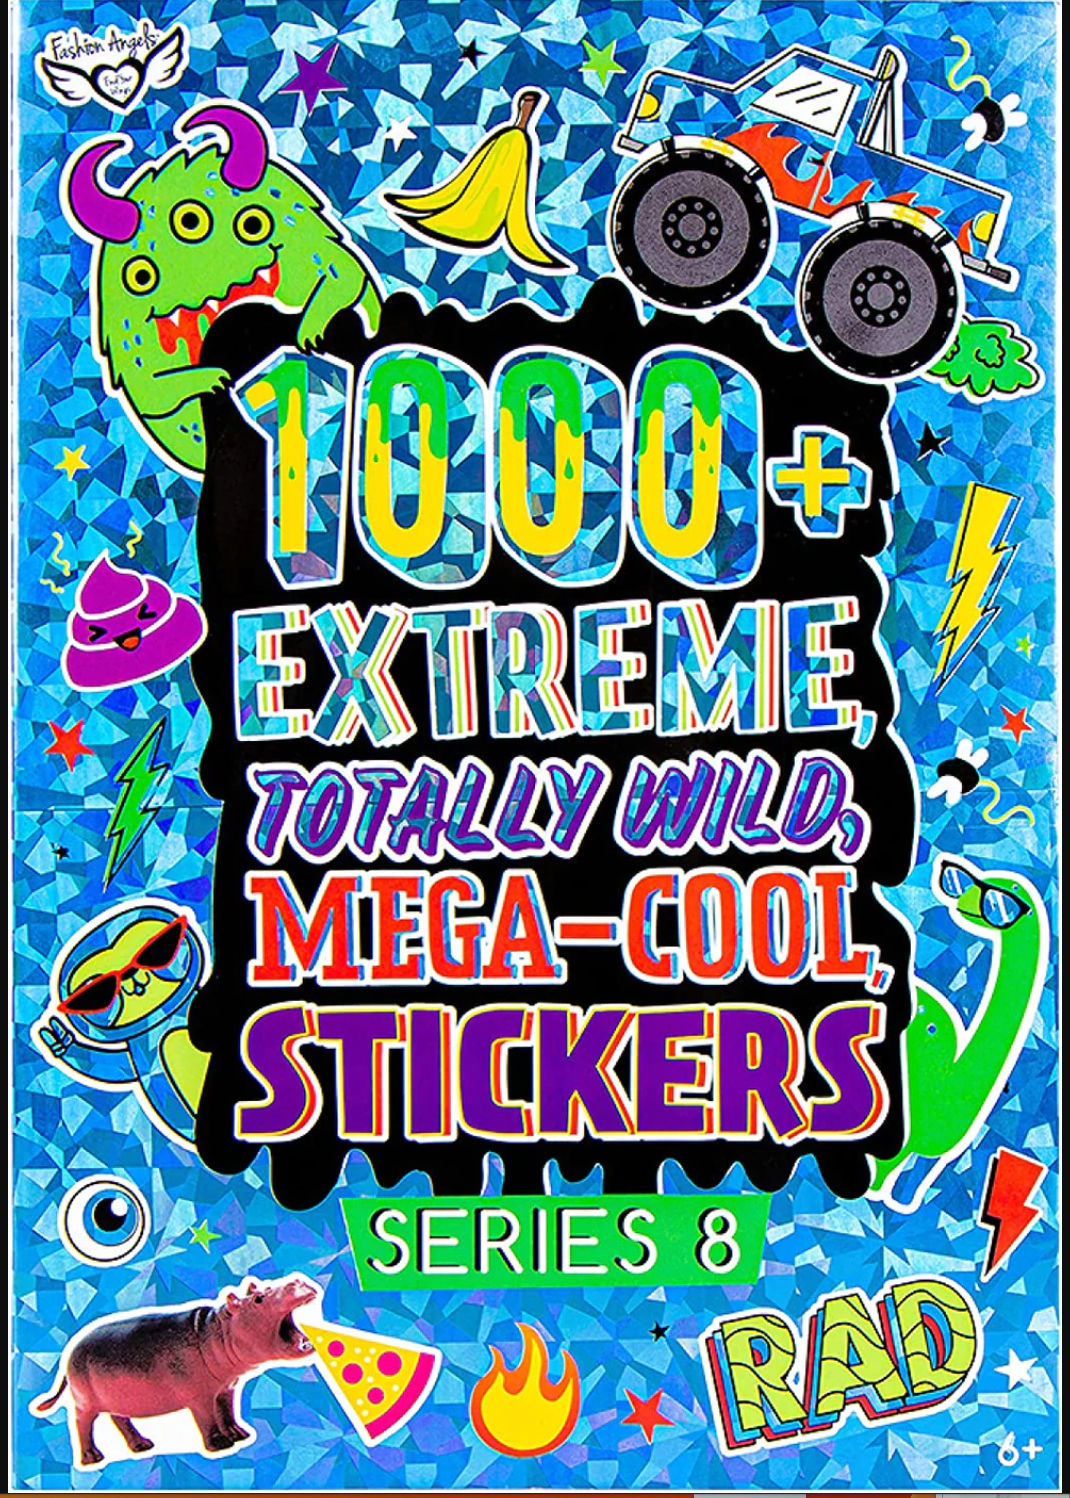 Fashion Angels 1000+ Mega Cool Stickers for Kids